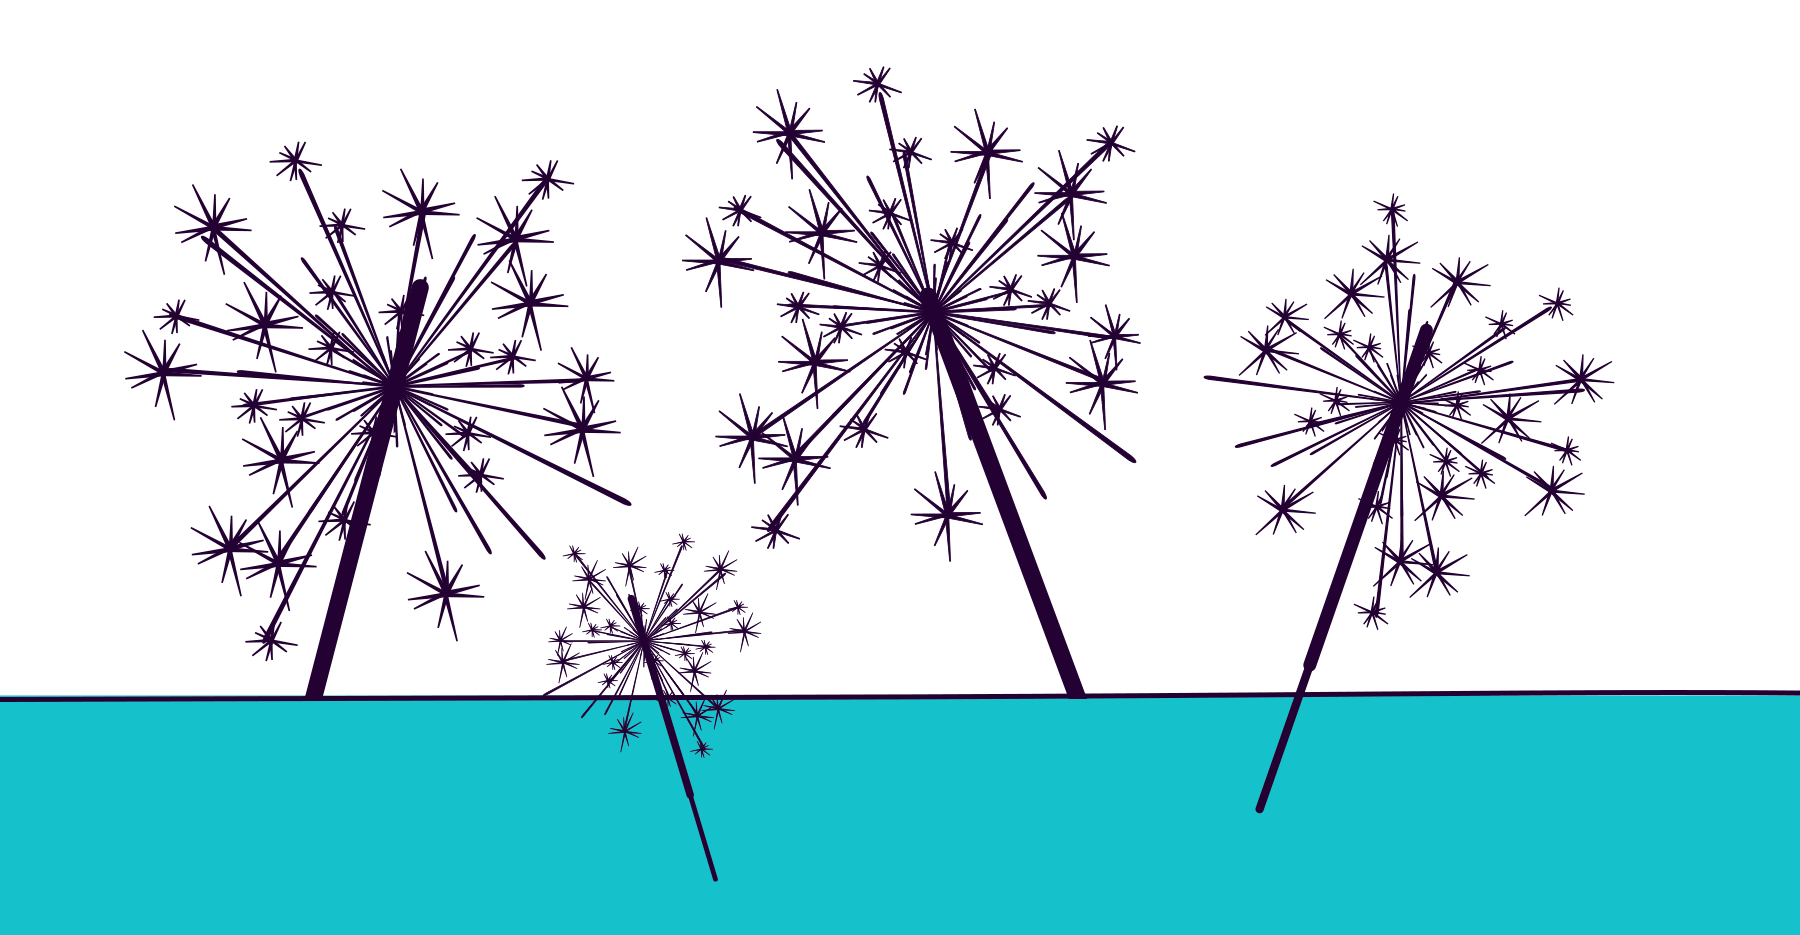 An illustration of some sparklers on a blue background